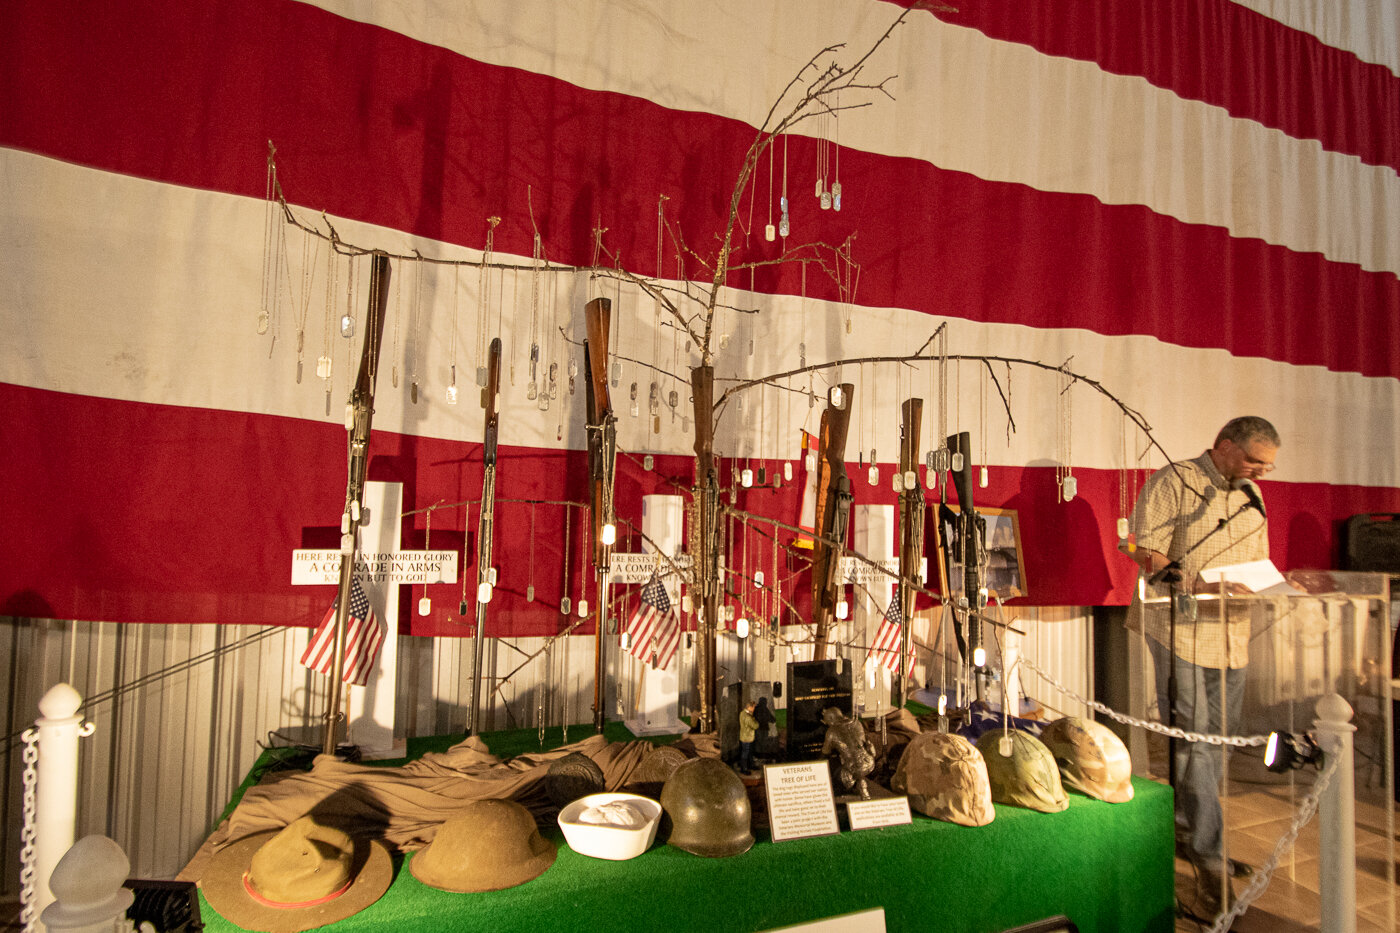 Names of fallen service members hang from the branches of the Tree of Life display at the Veterans Memorial Museum in Chehalis.